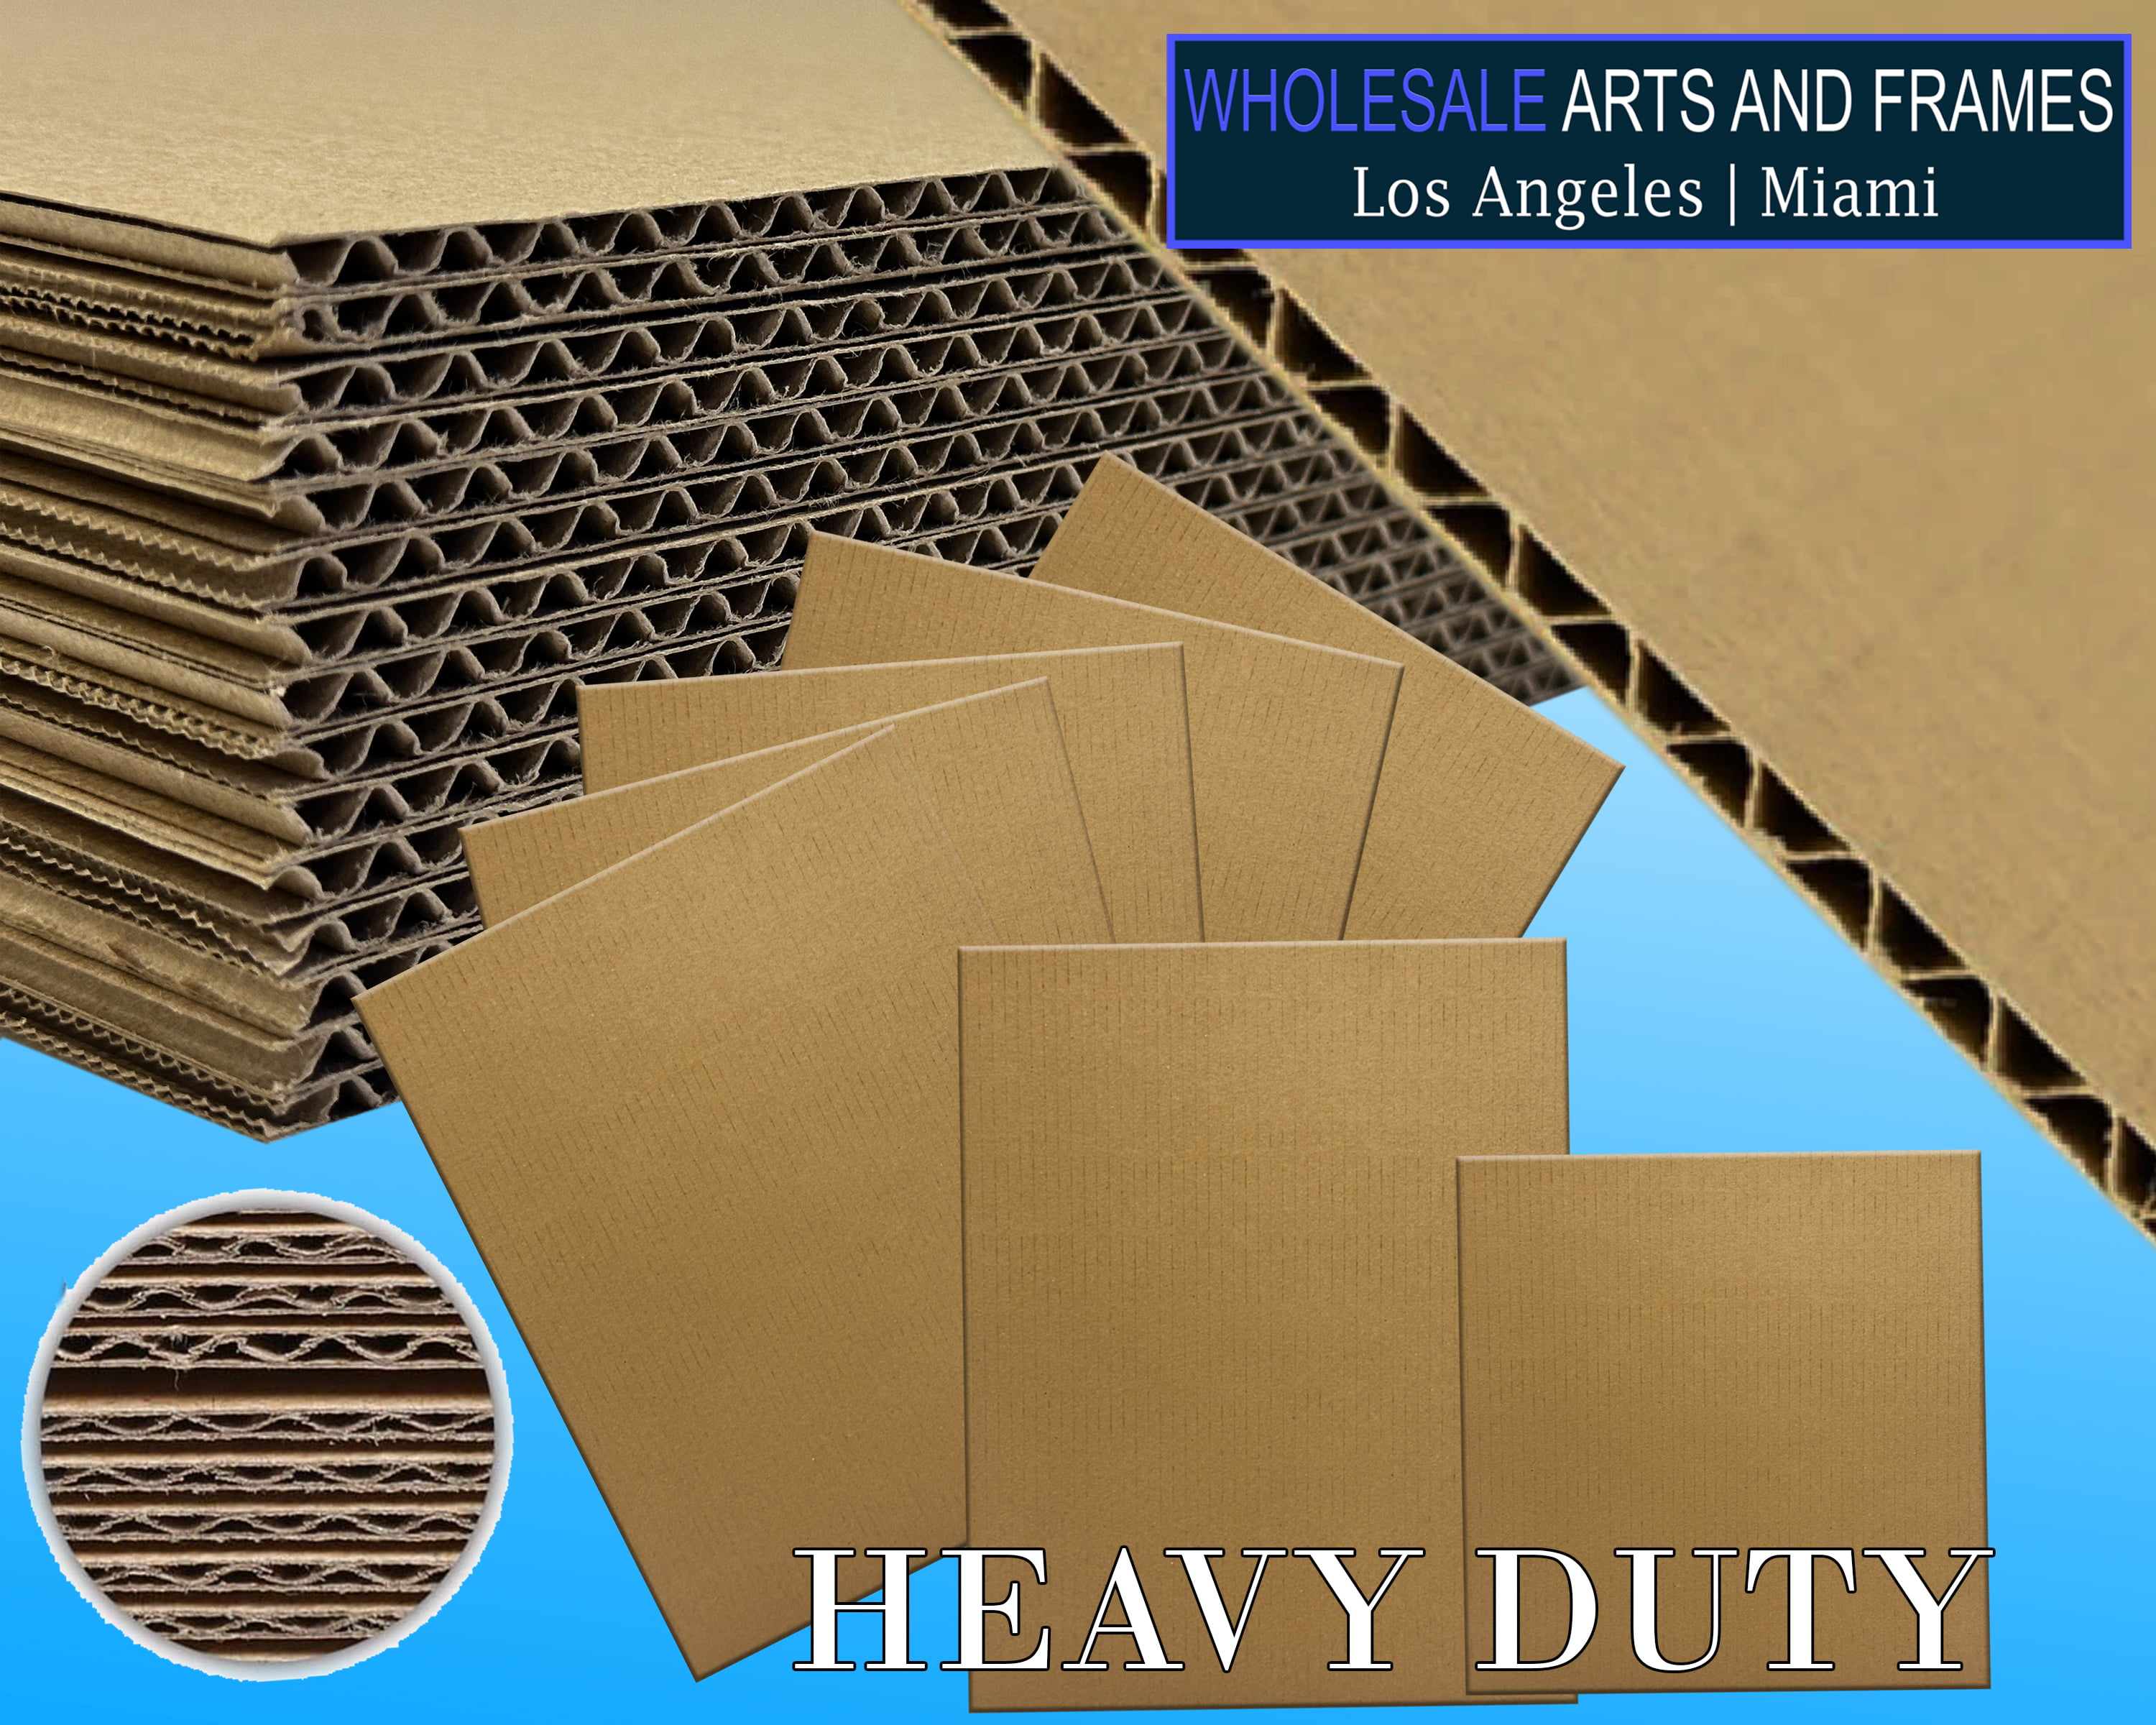 Corrugated Cardboard Sheets 4mm - 3/16 Thick 24x36- 5 Pack. Filler Insert  Pads, Brown Frame Backing Rectangular & Square Flat Boards for Art&Crafts,  DIY Projects, Mailing,Dividers & Packaging 